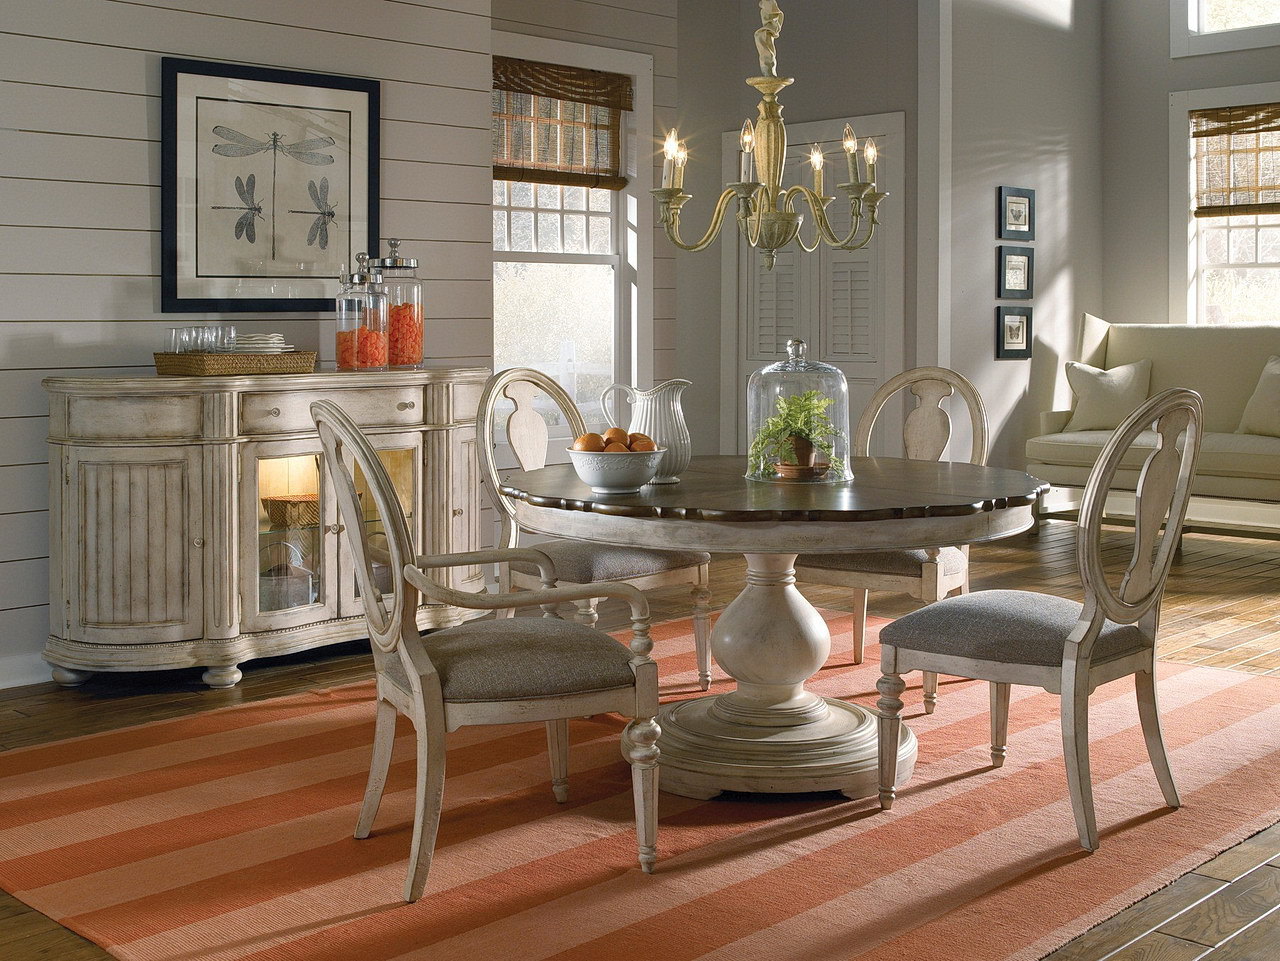 personal dining room ideas